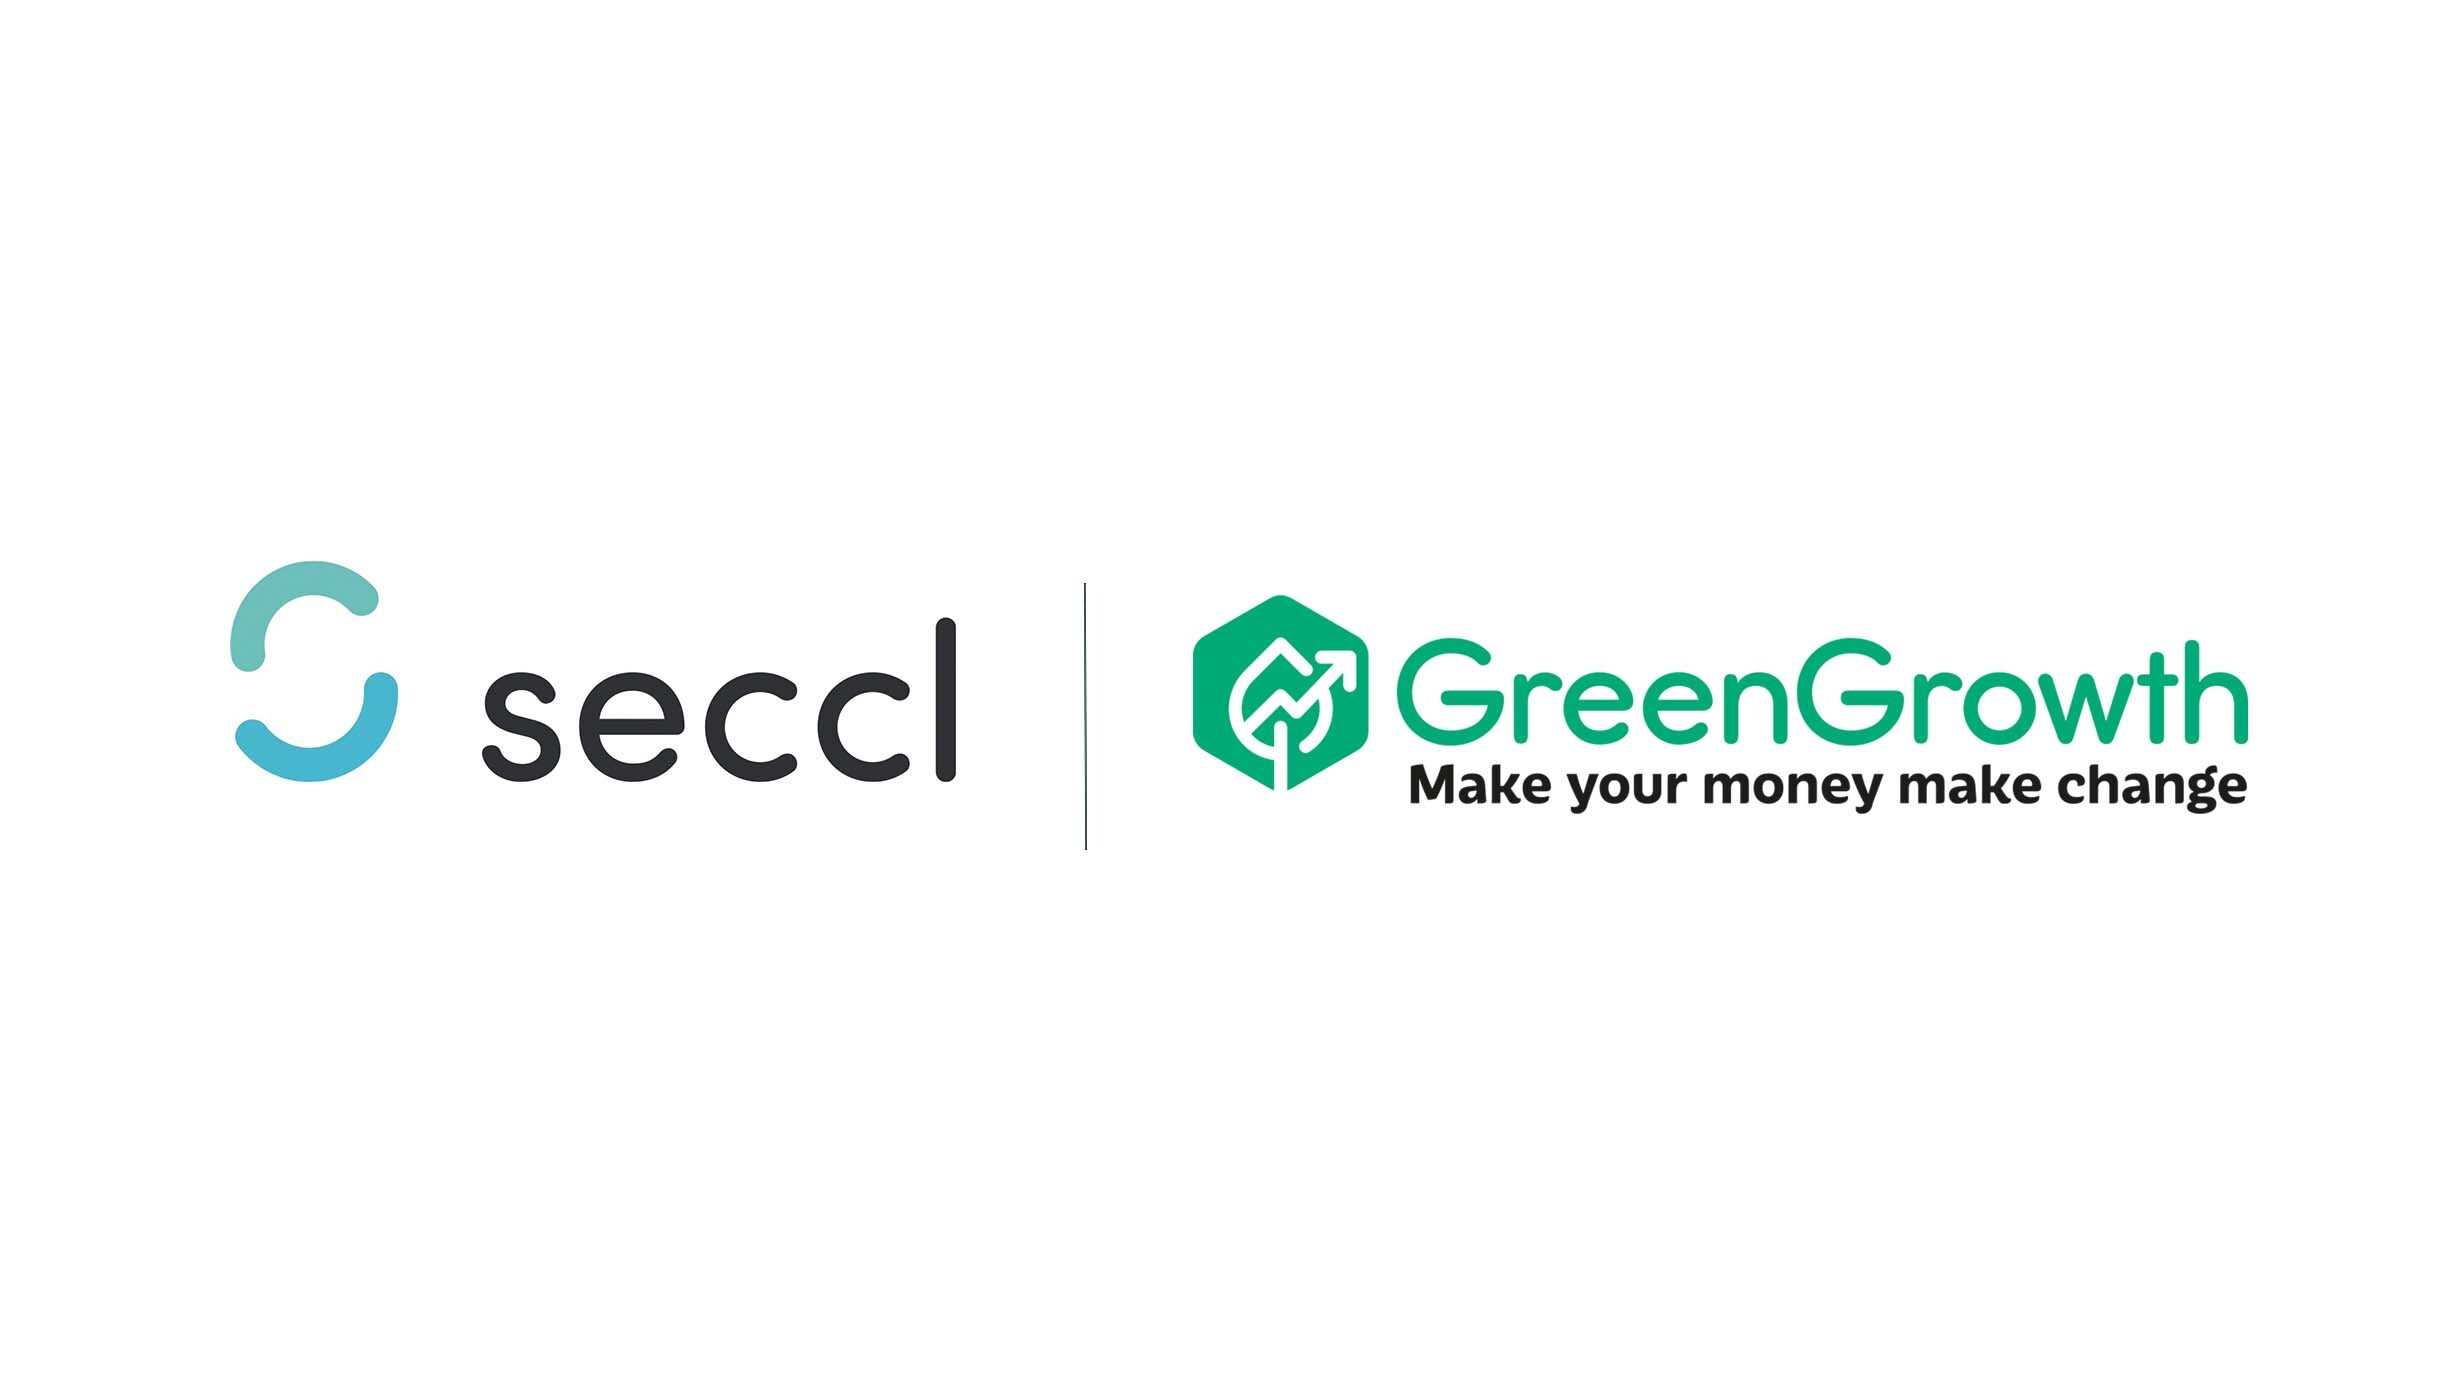 Introducing GreenGrowth: the first carbon footprint-based investment app